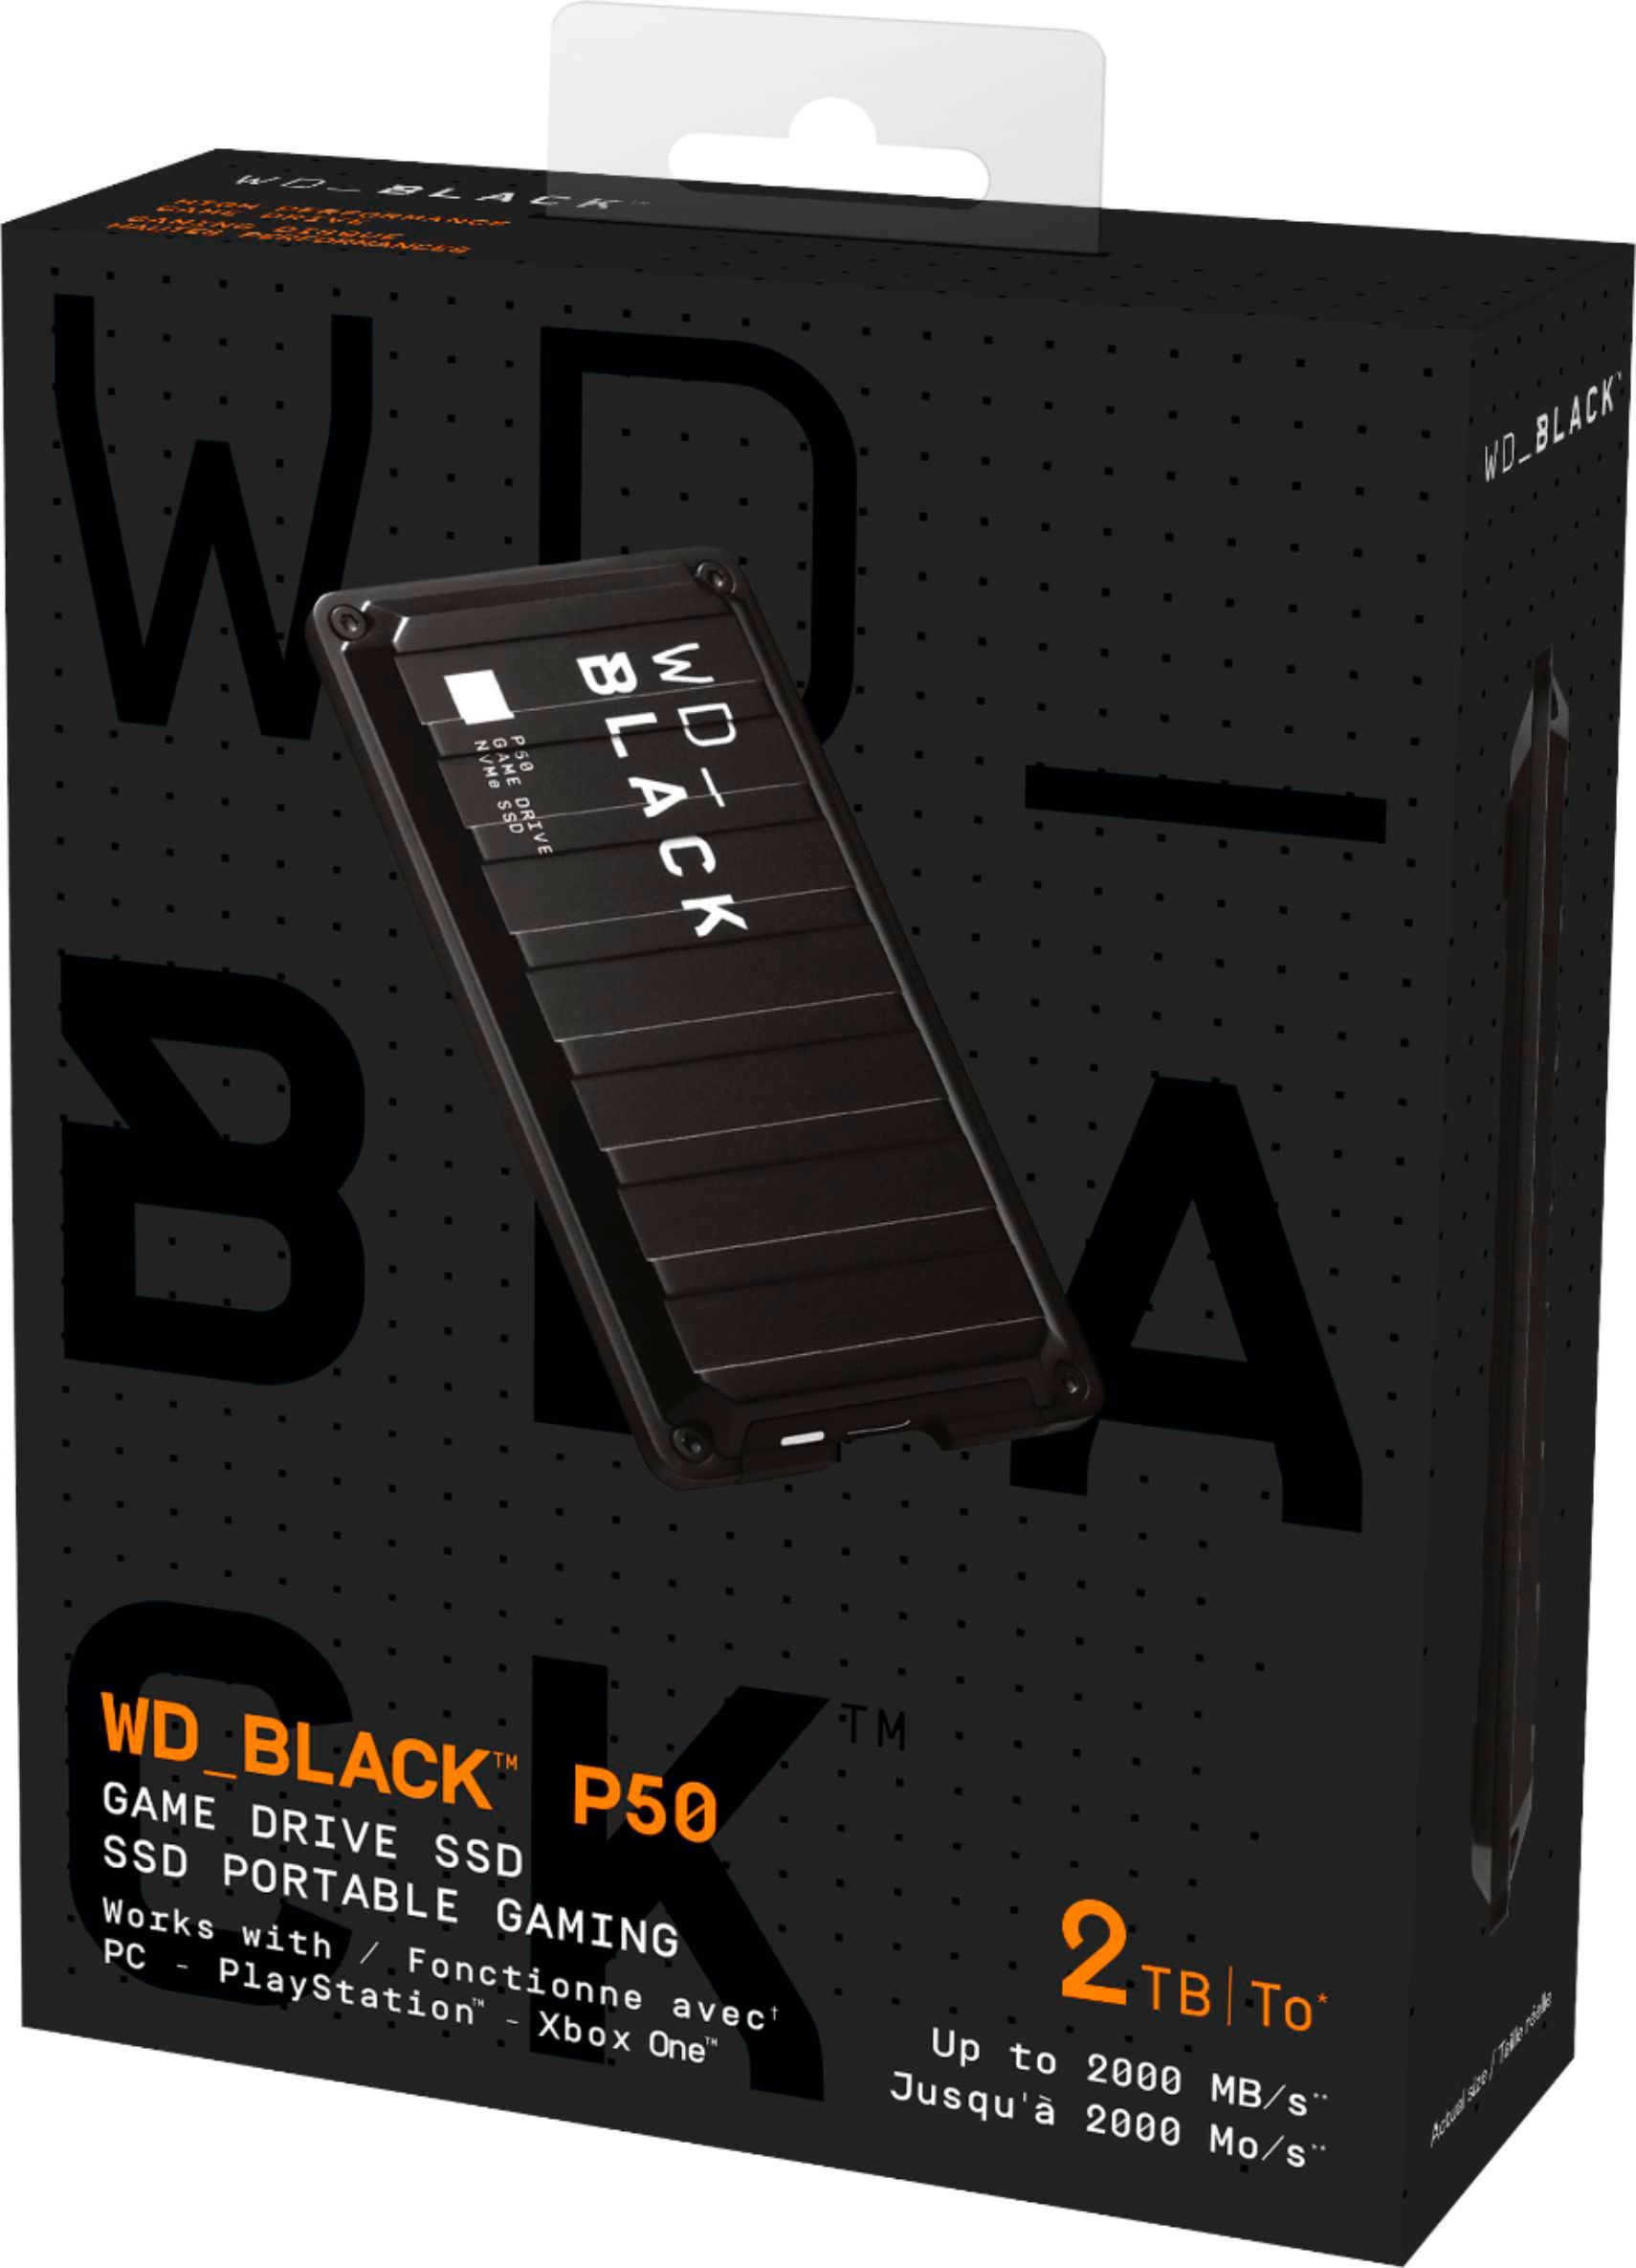 Wd Wd Black P50 2tb Game Drive External Usb 3 2 Gen 2x2 Portable Solid State Drive Black Wdba3s00bbk Wesn Best Buy